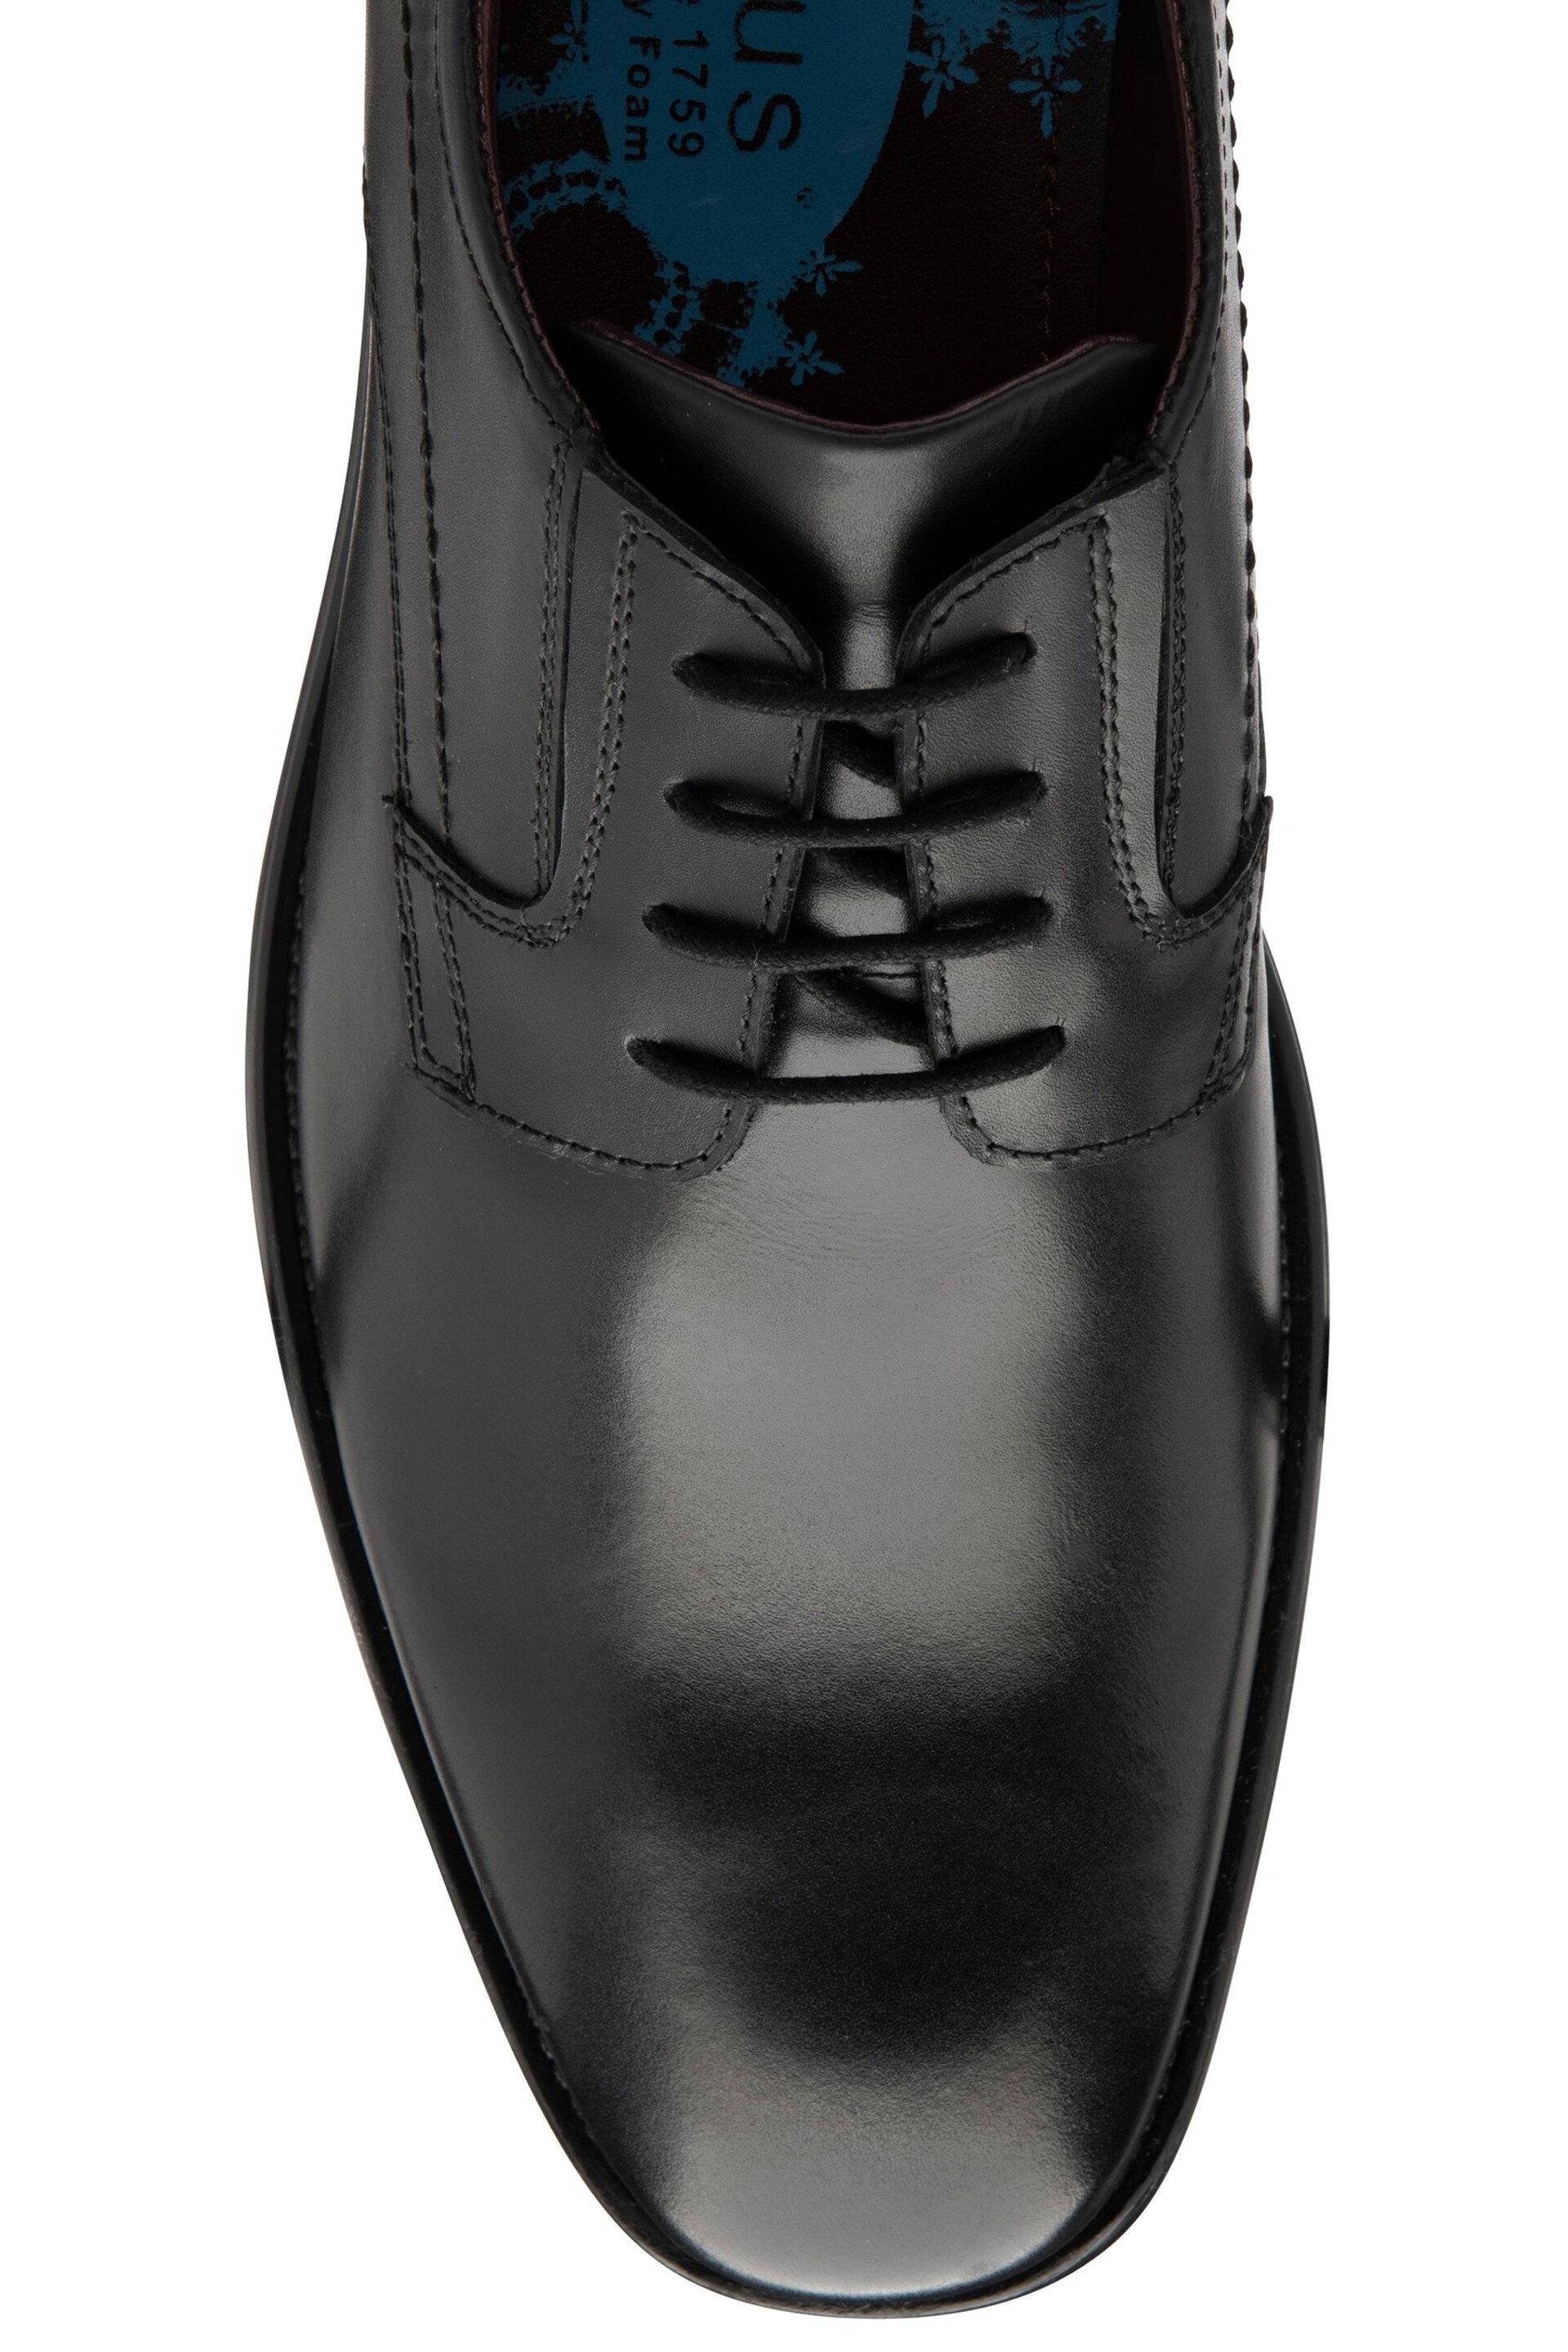 Lotus Black Leather Derby Shoes - Image 4 of 4